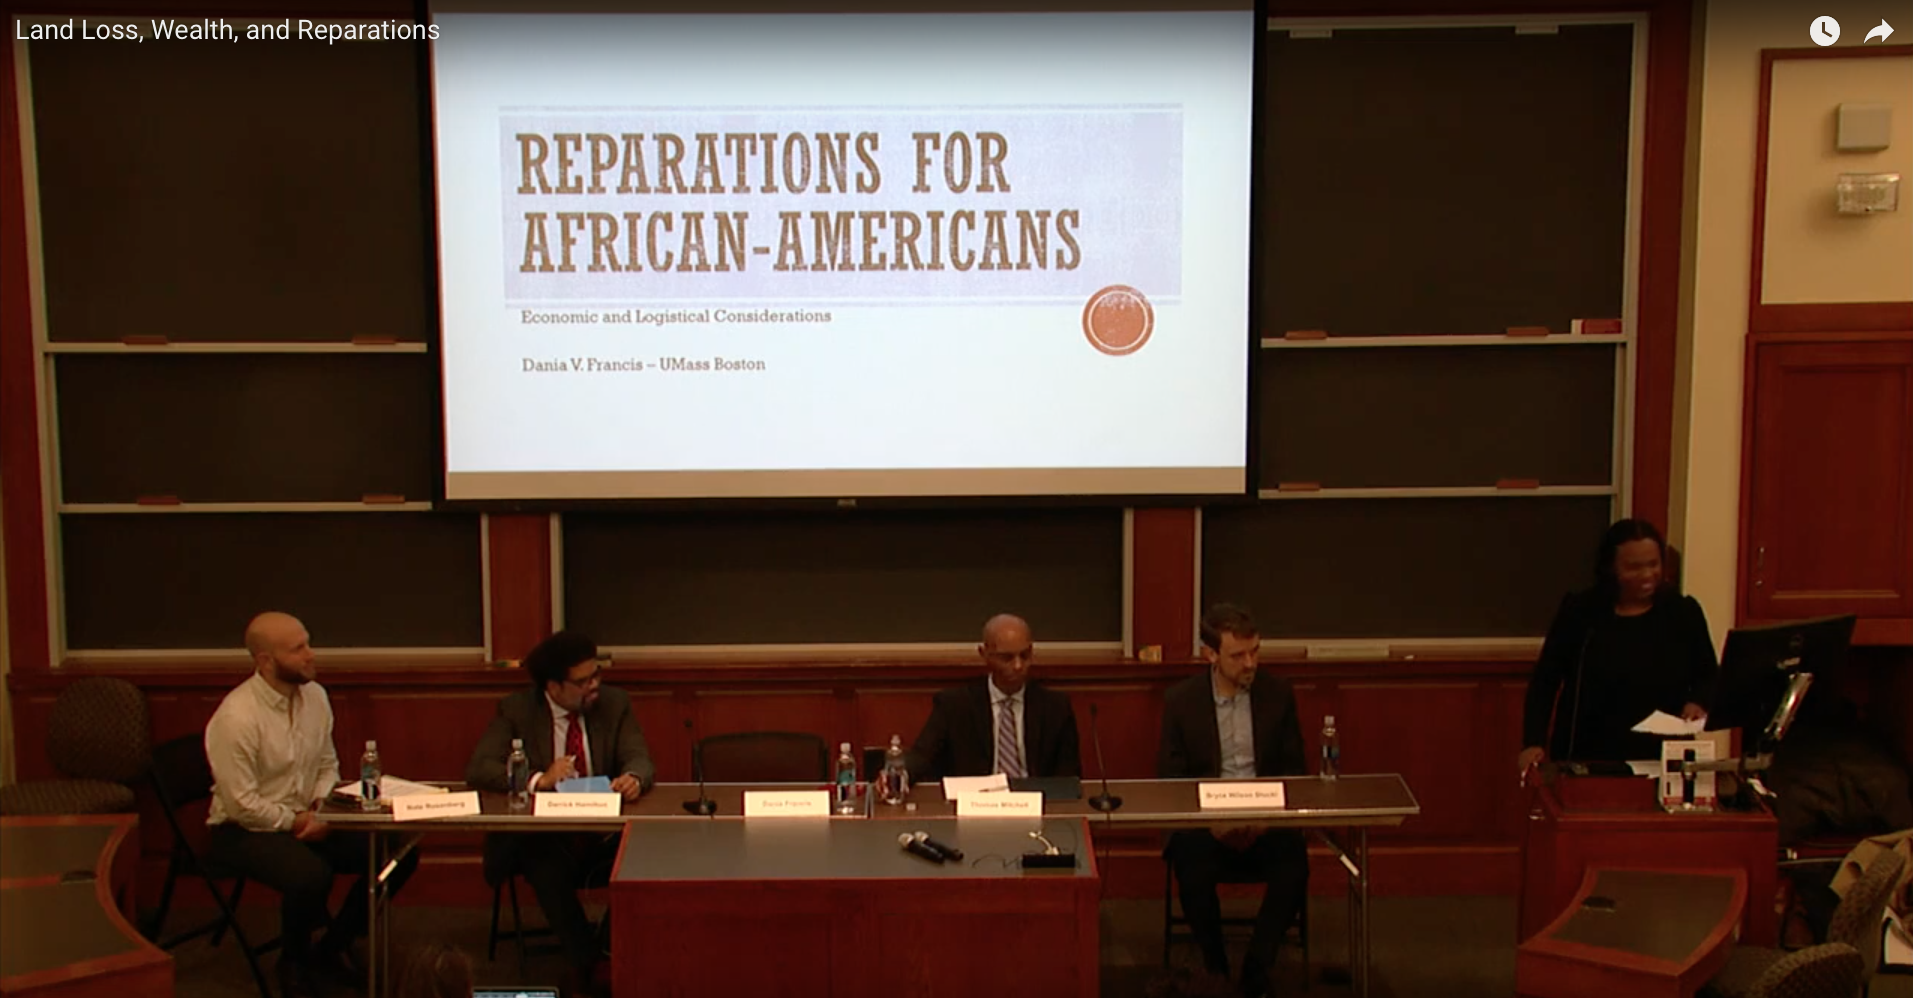 Land Loss, Wealth, and Reparations Panel Discussion